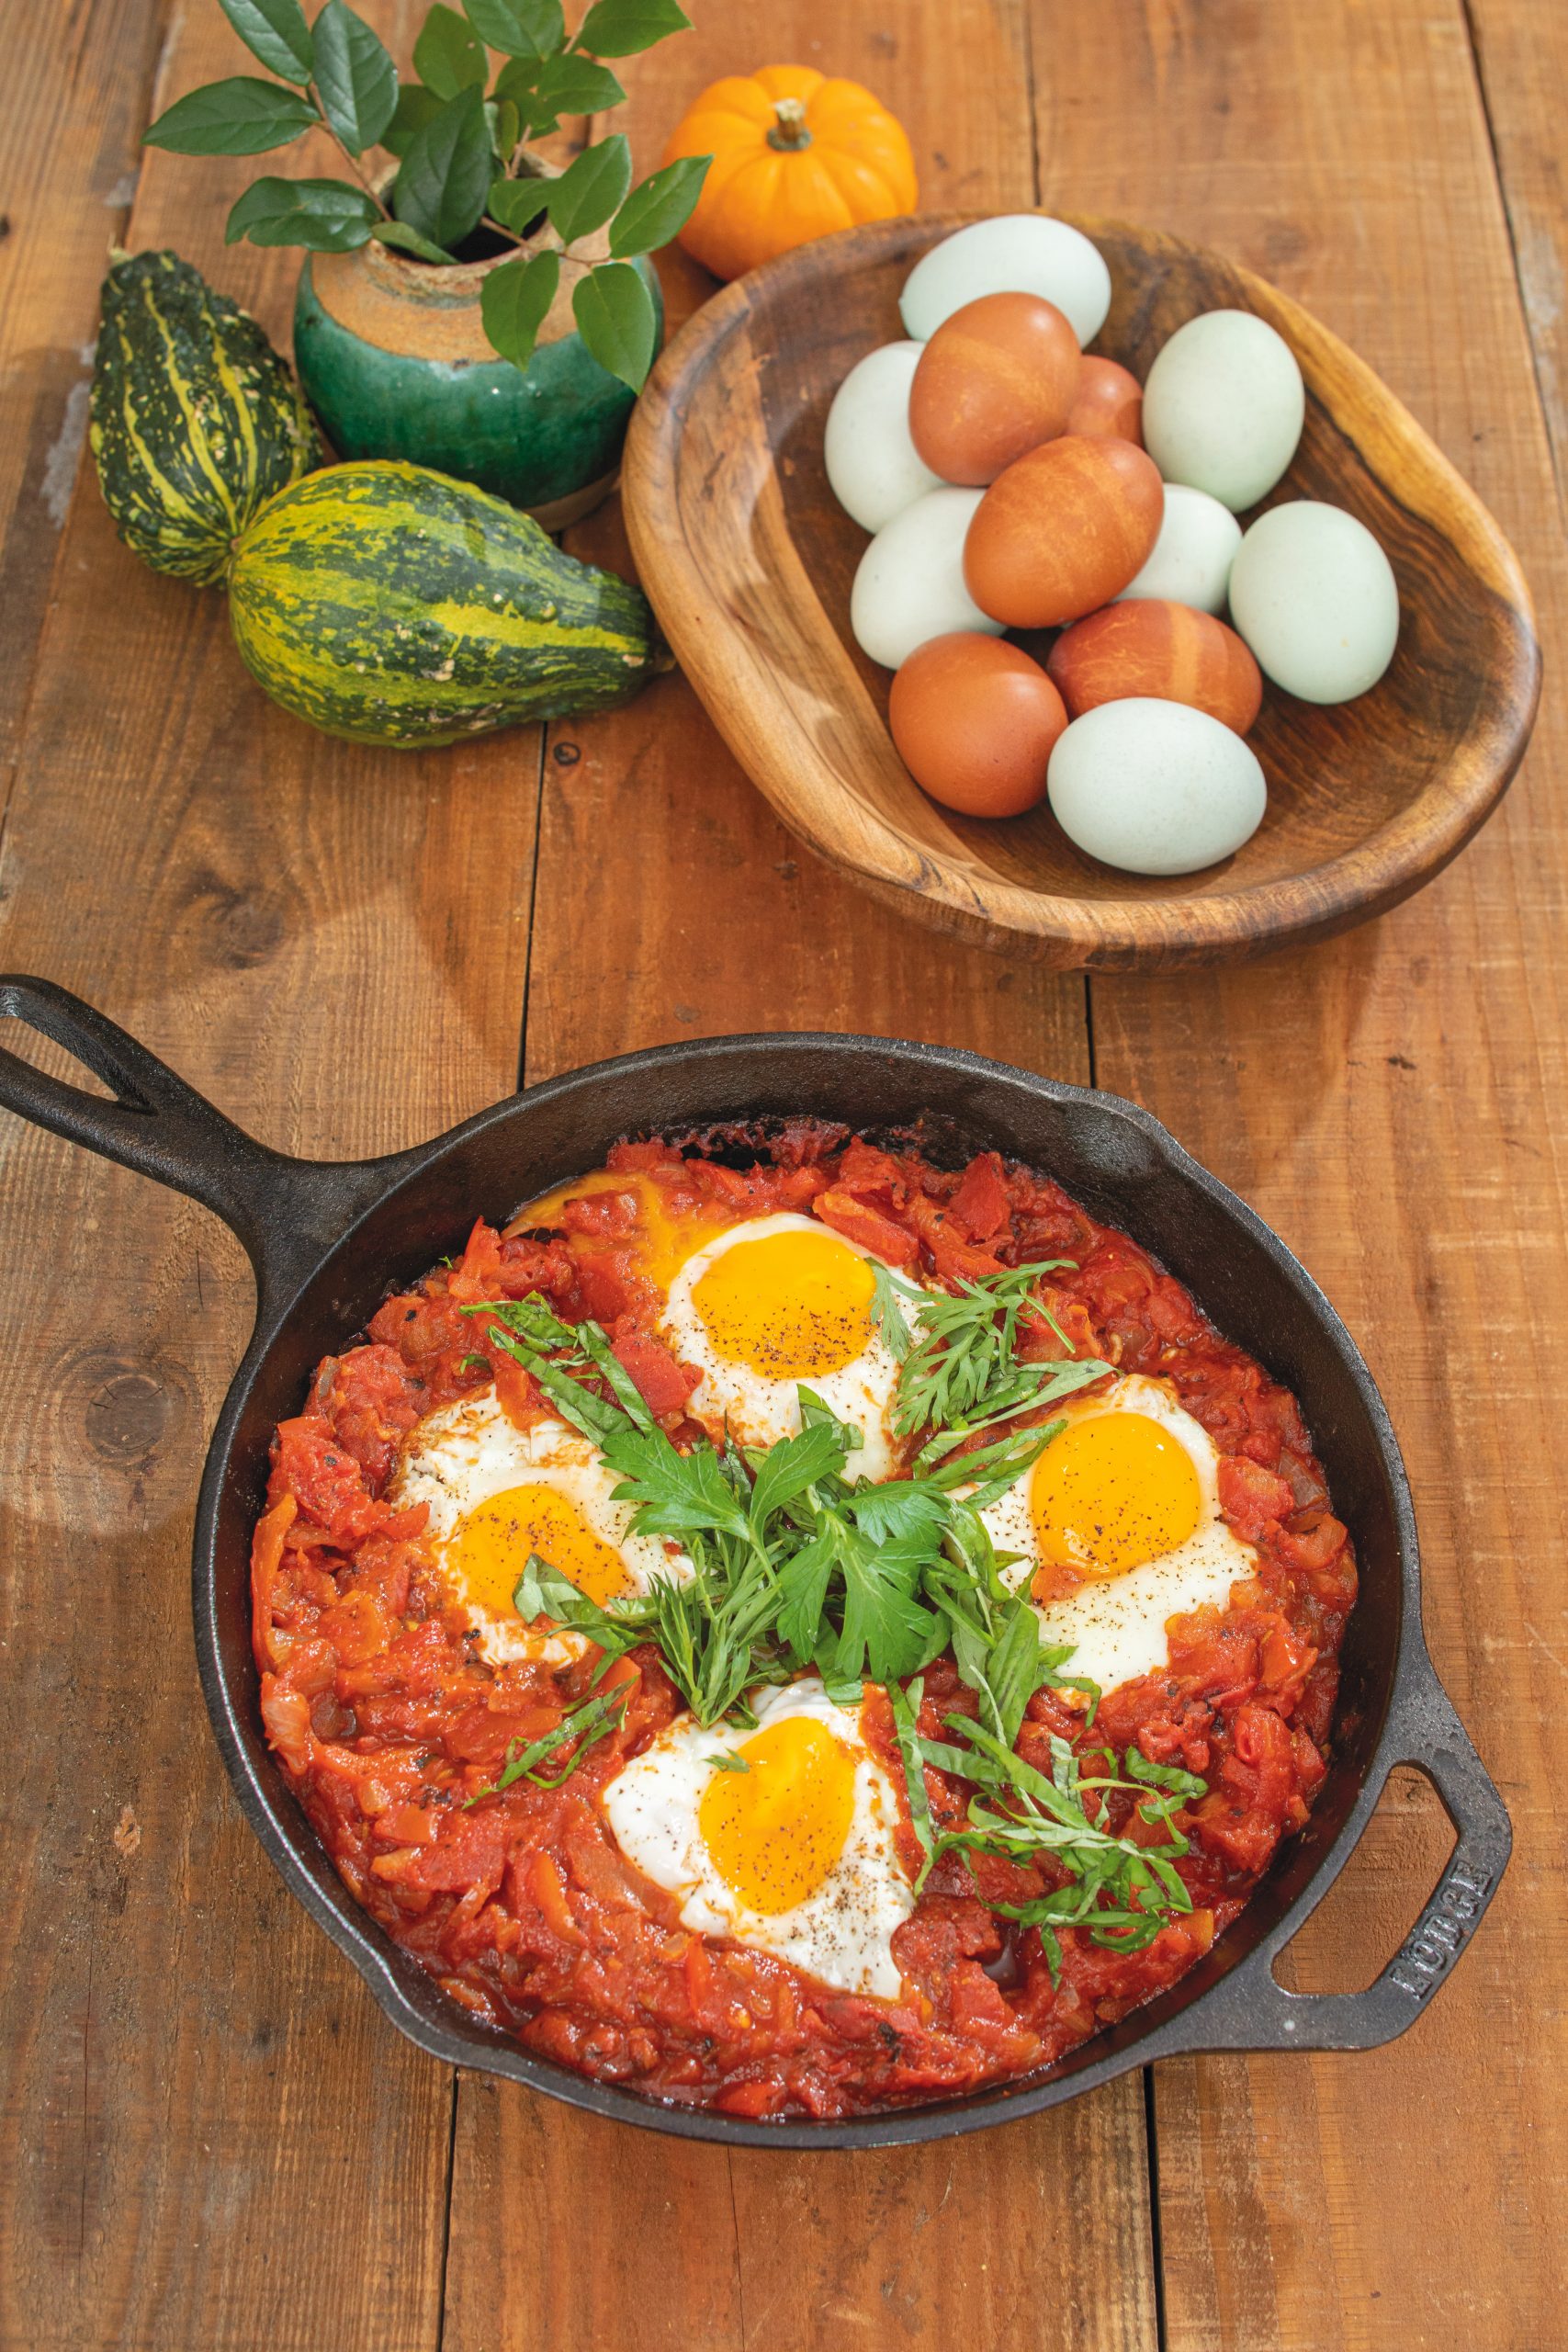 Shakshuka, which originated in the Maghreb countries of Northwest Africa, is a breakfast favorite throughout the Middle East. Make the sauce three or four days in advance and refrigerate. Reheat, and then poach eggs on the stovetop or in a hot oven. Maple oval bowl courtesy of Kudzu Bakery & Market.